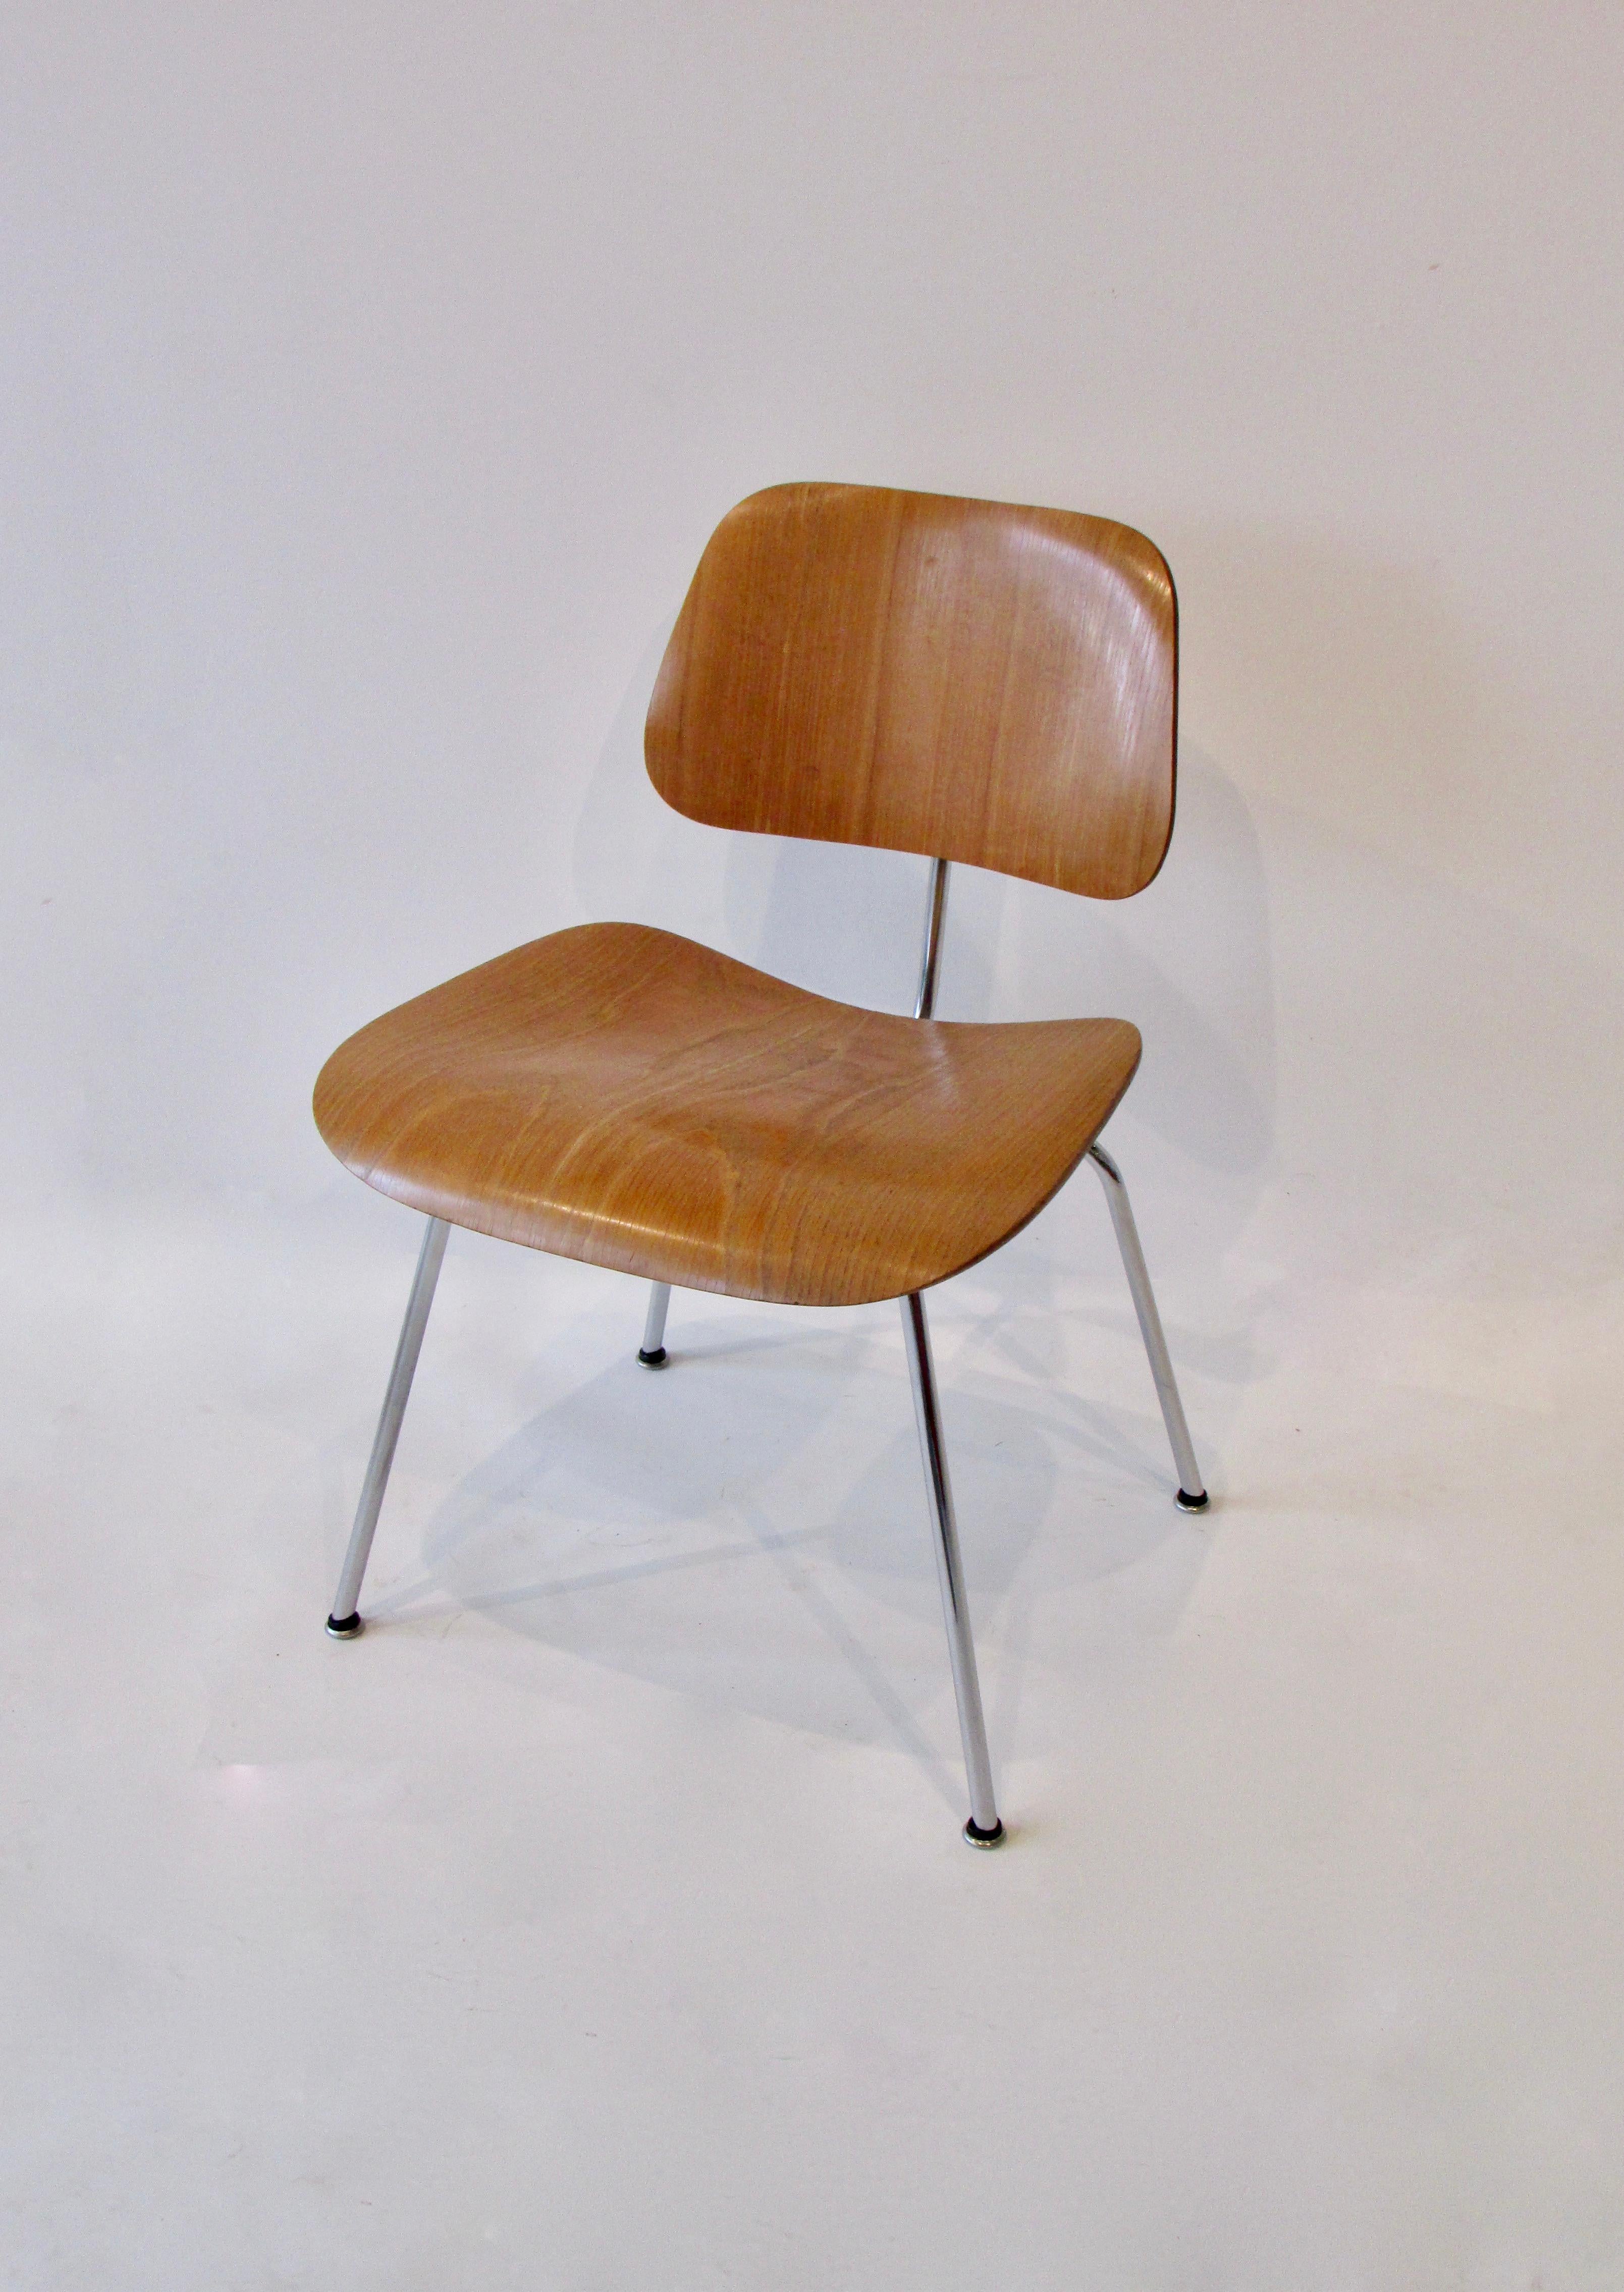 Very nice early production Charles and Ray Eames designed dining chair metal (DCM ). Clean chrome frame supports ash grain seat and back. Retains original Eames Evans Herman Miller water decal label. Label dates to late 1940s. Evans Products